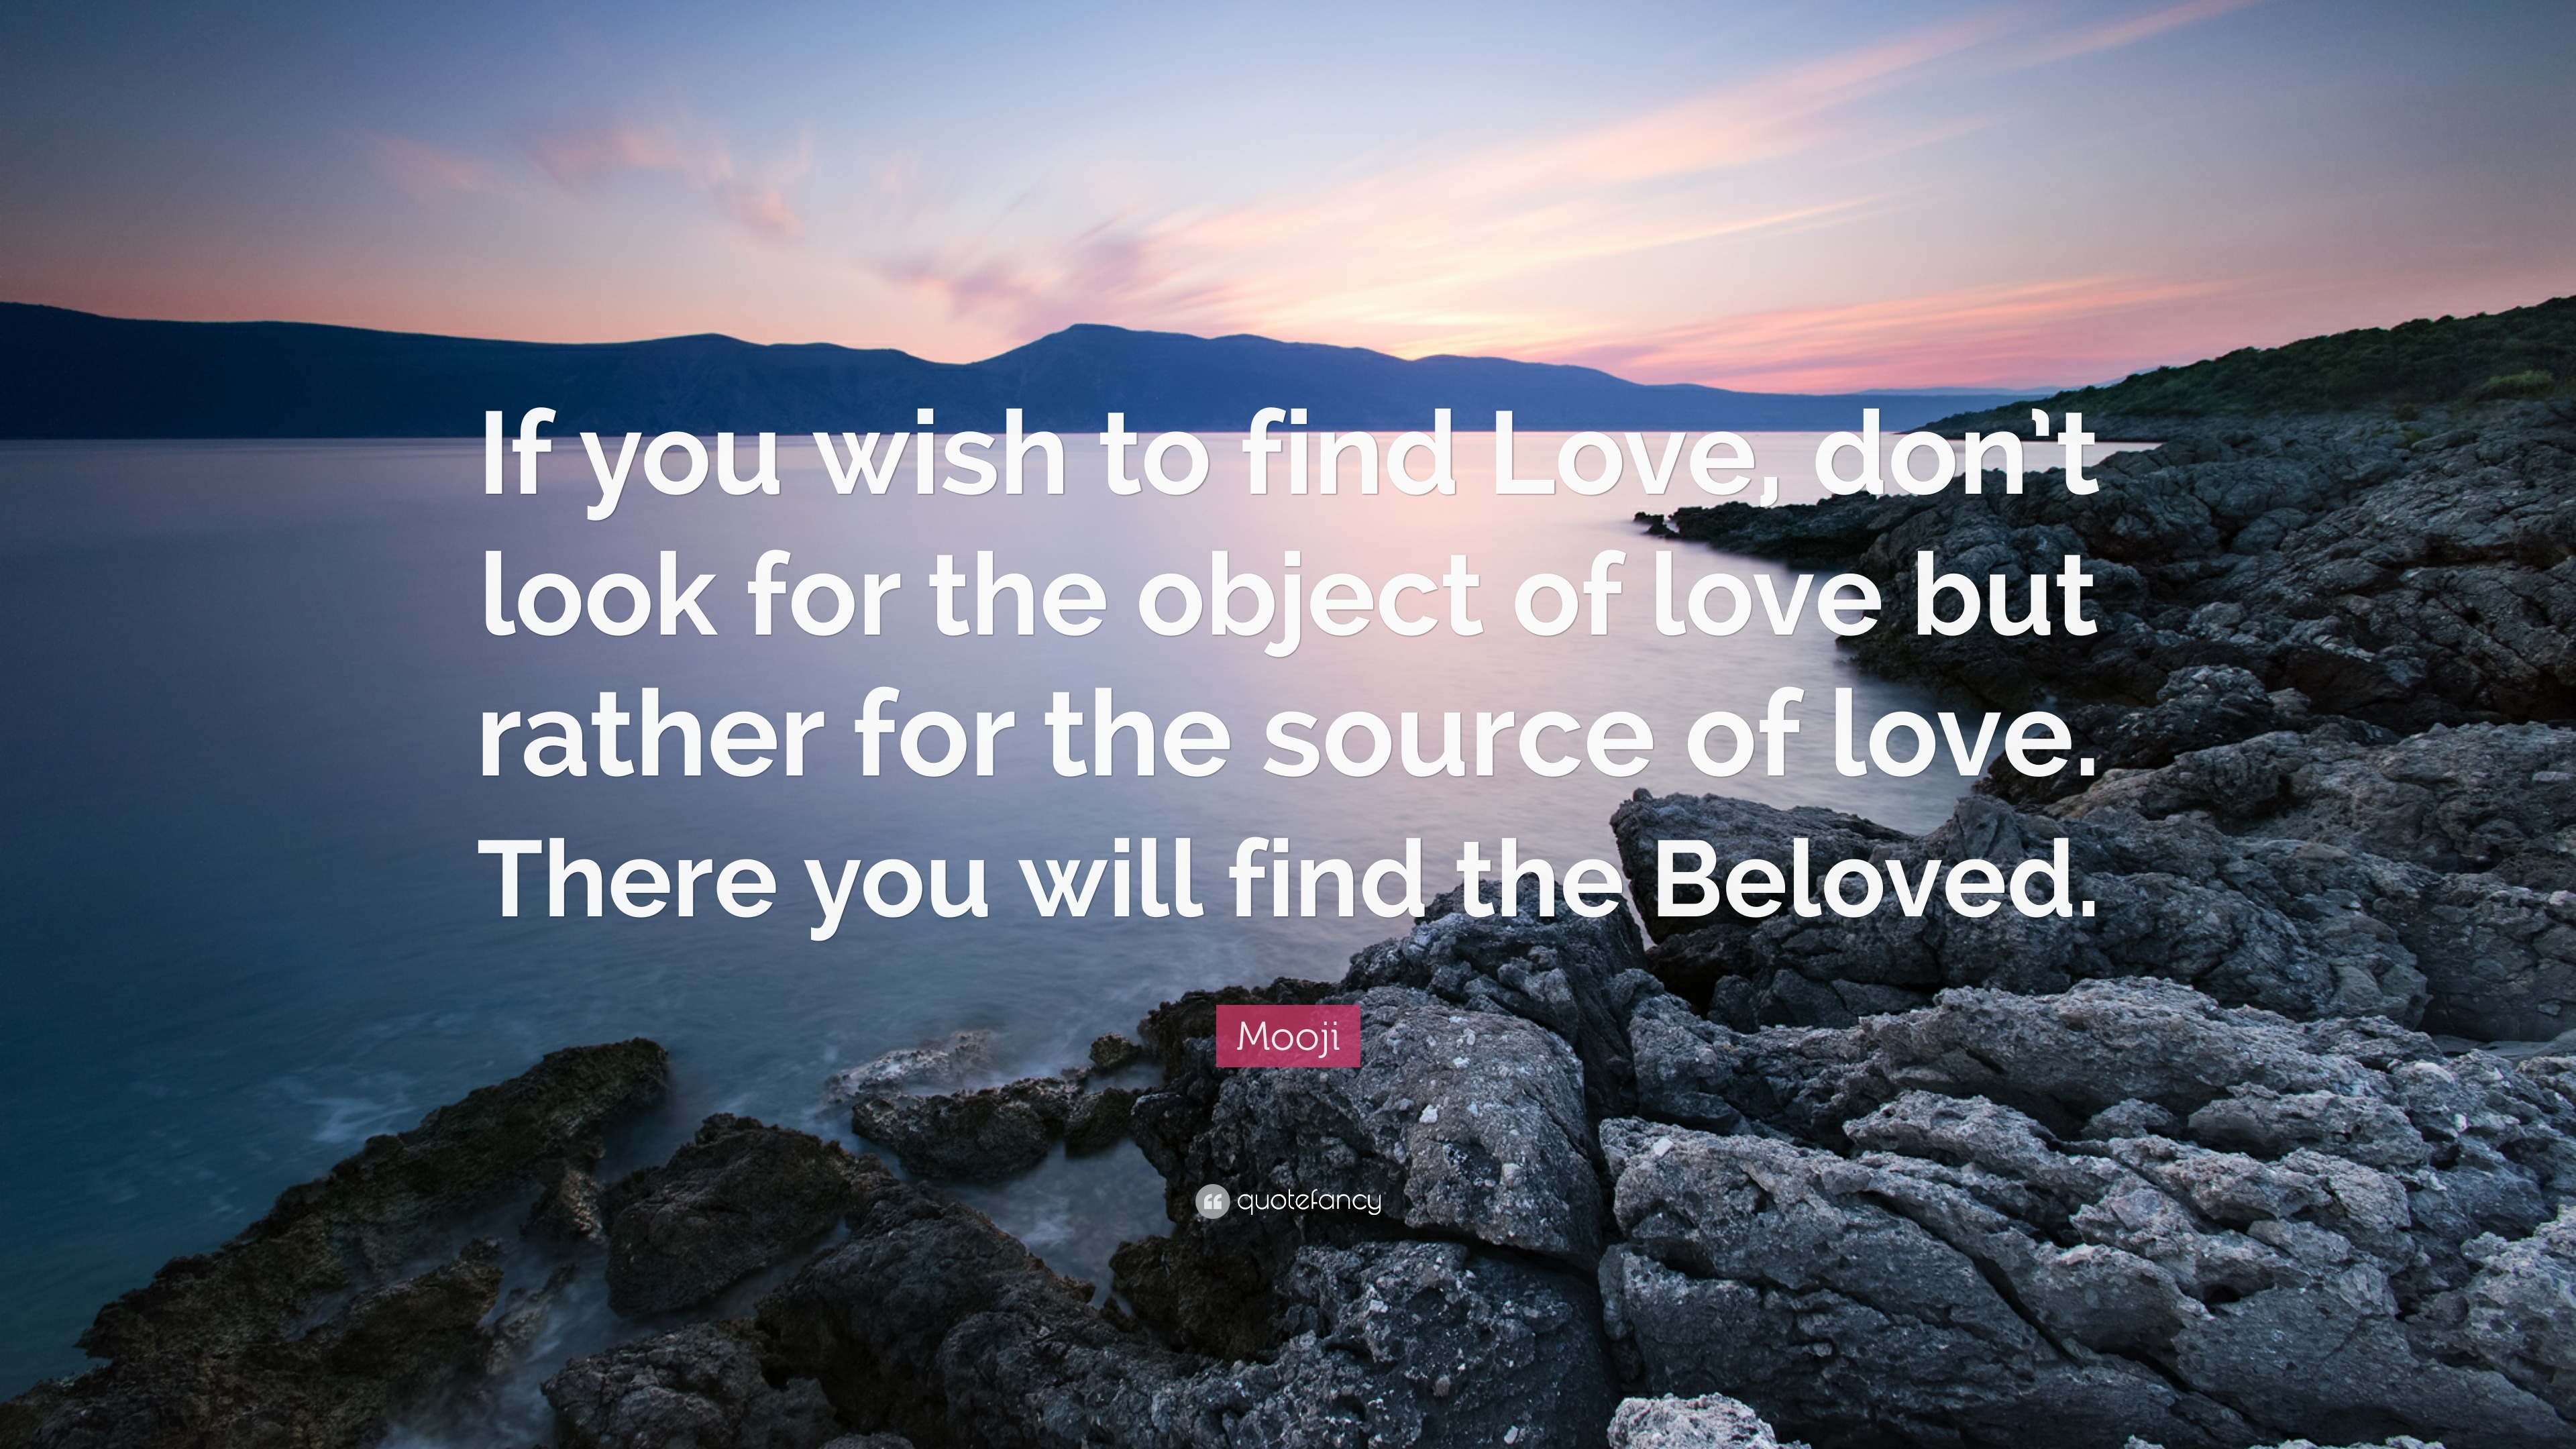 Mooji Quote “If you wish to find Love don t look for